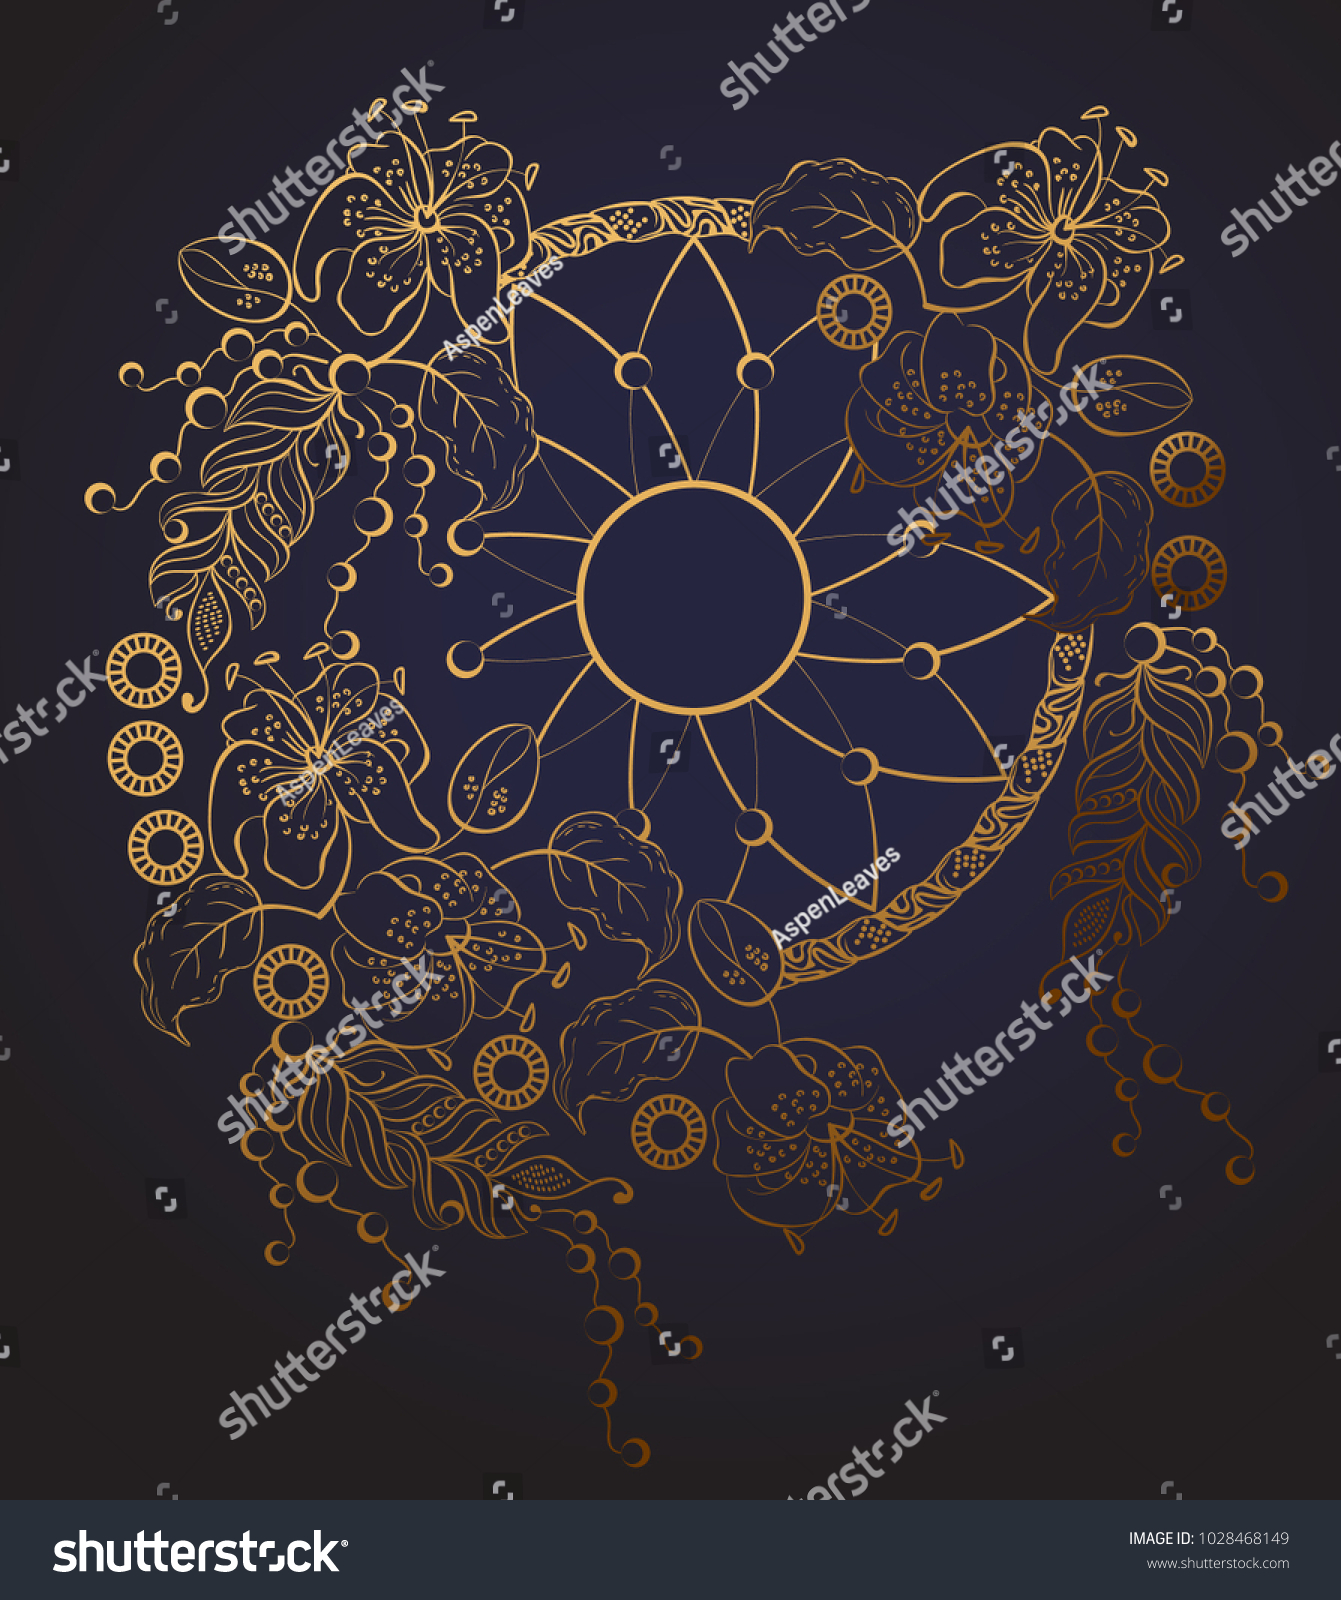 SVG of Golden dream catcher made with a gradient with flowers, lilies, leaves, beads, pearls, cobwebs, thread, bird feathers on a dark blue background. Boho chic style svg